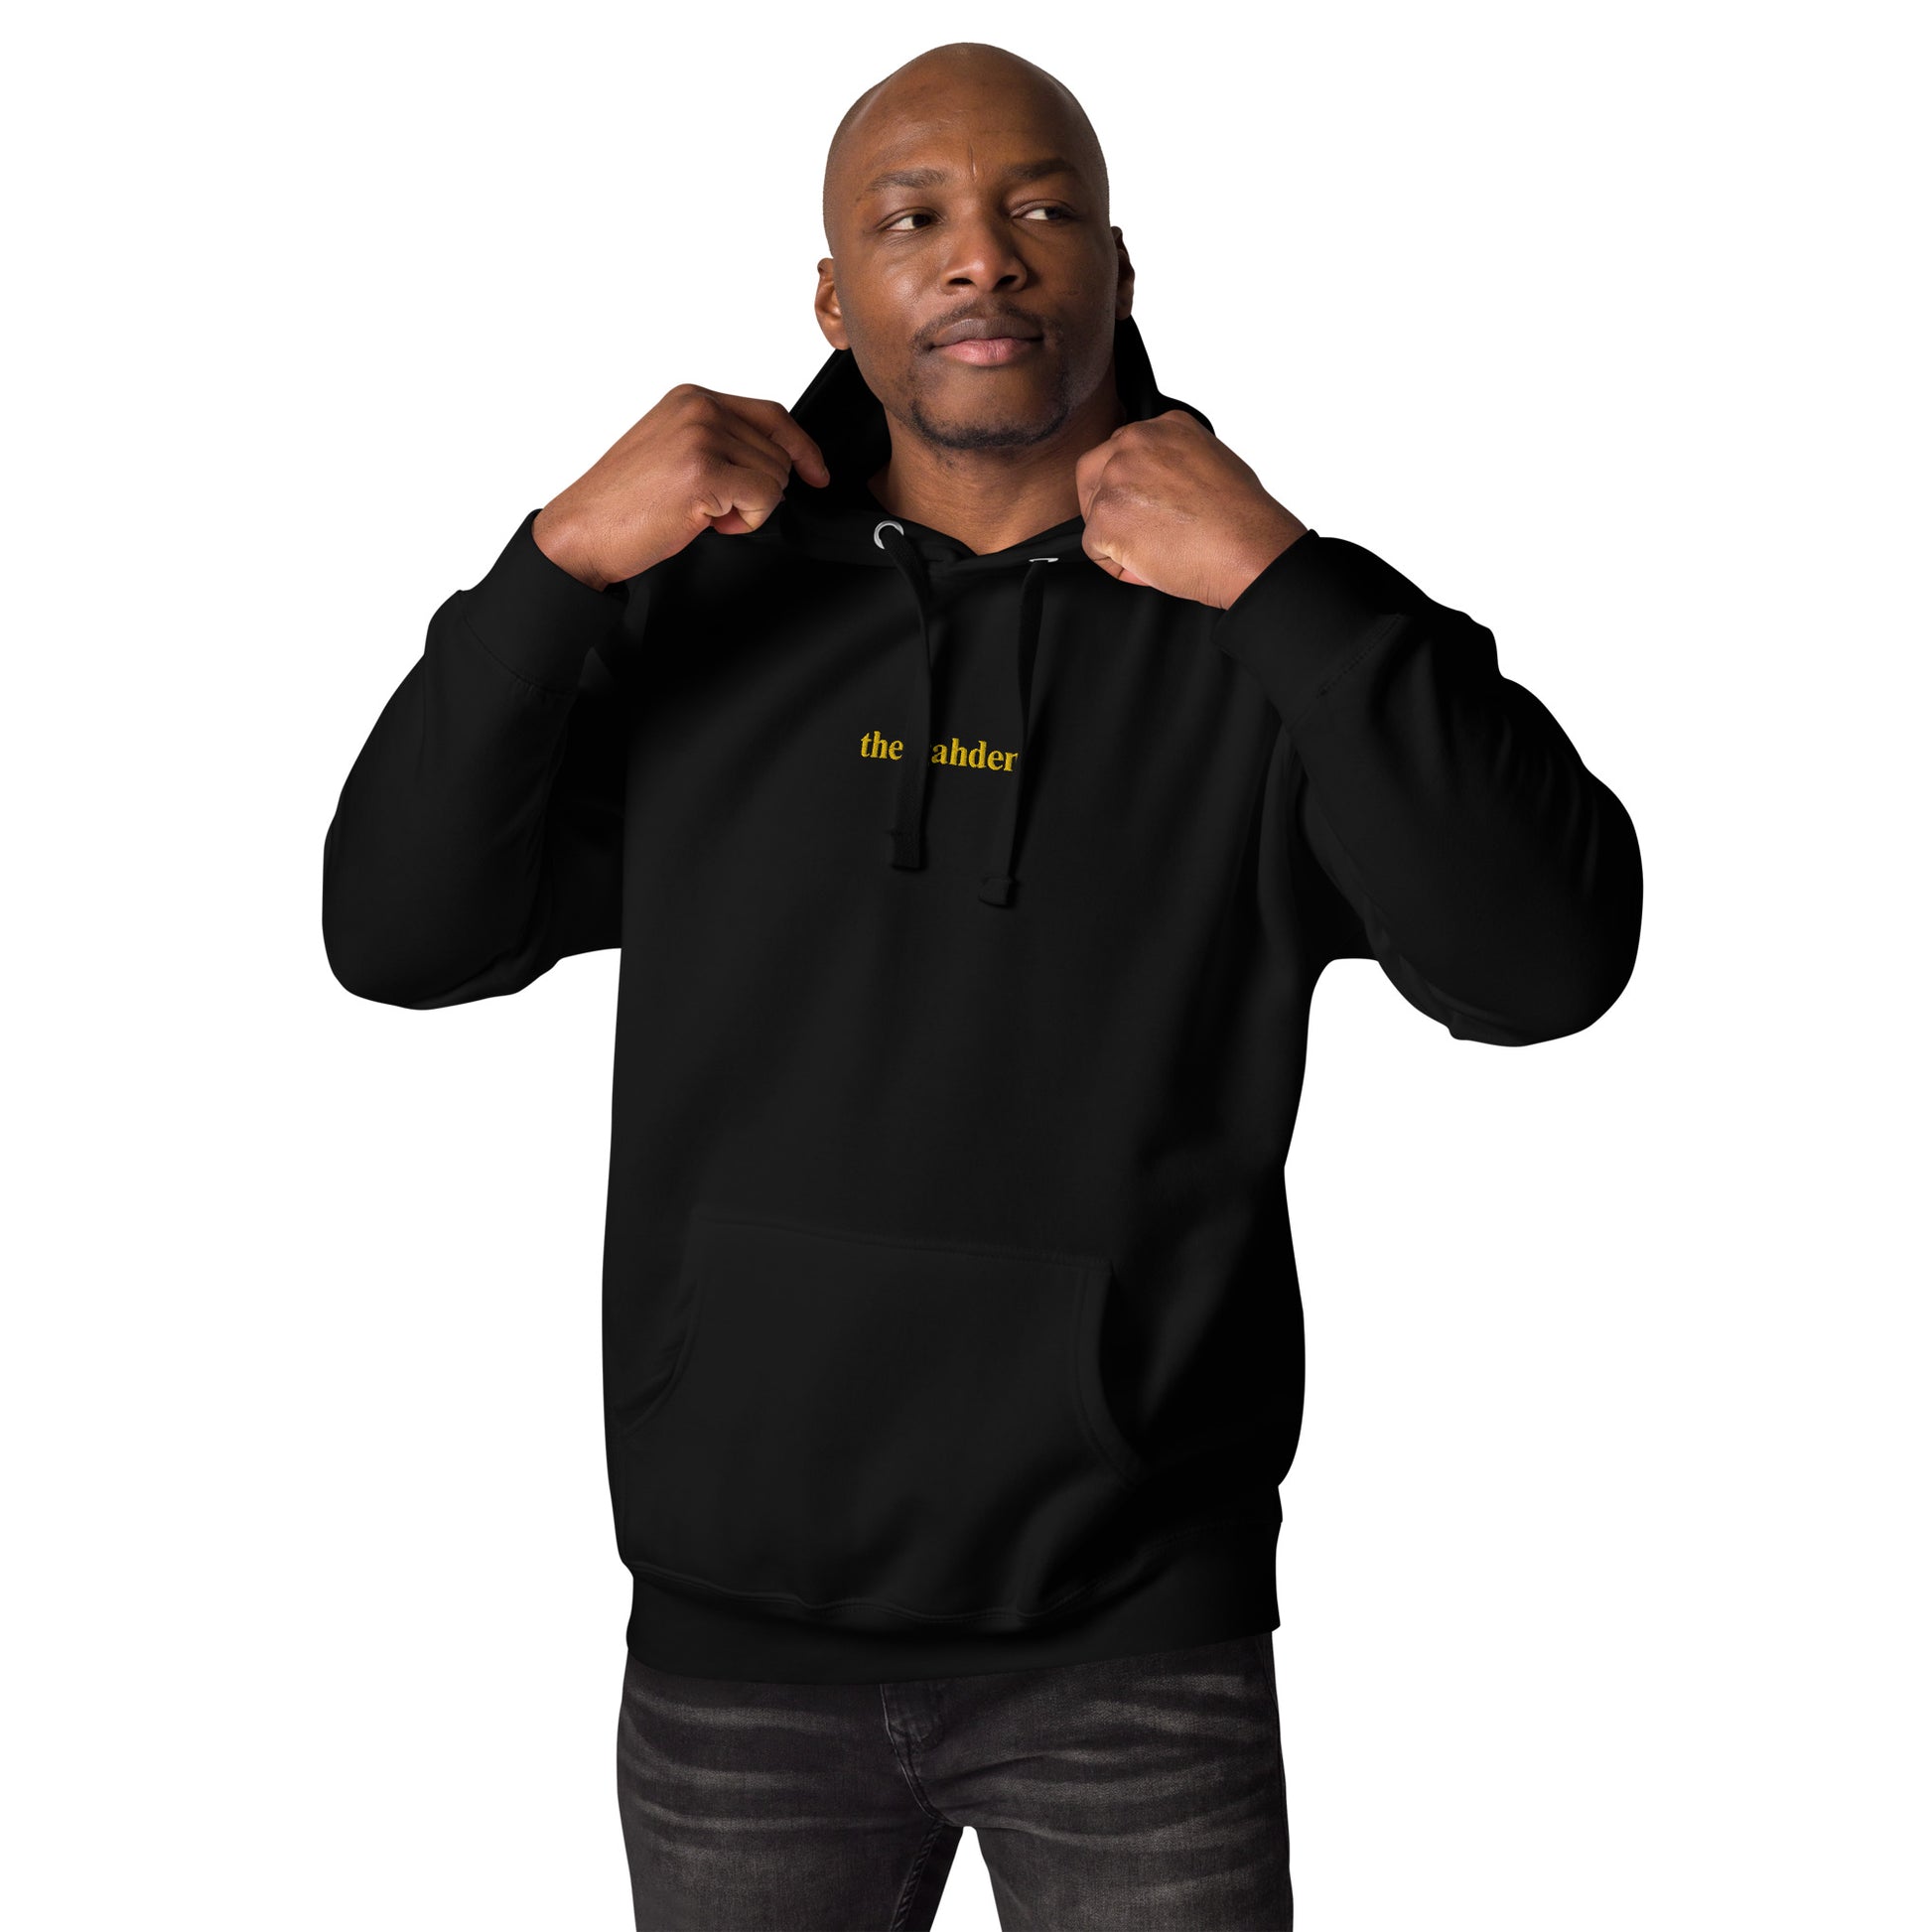  man wearing black hoodie that says "the gahden" in gold embroidery